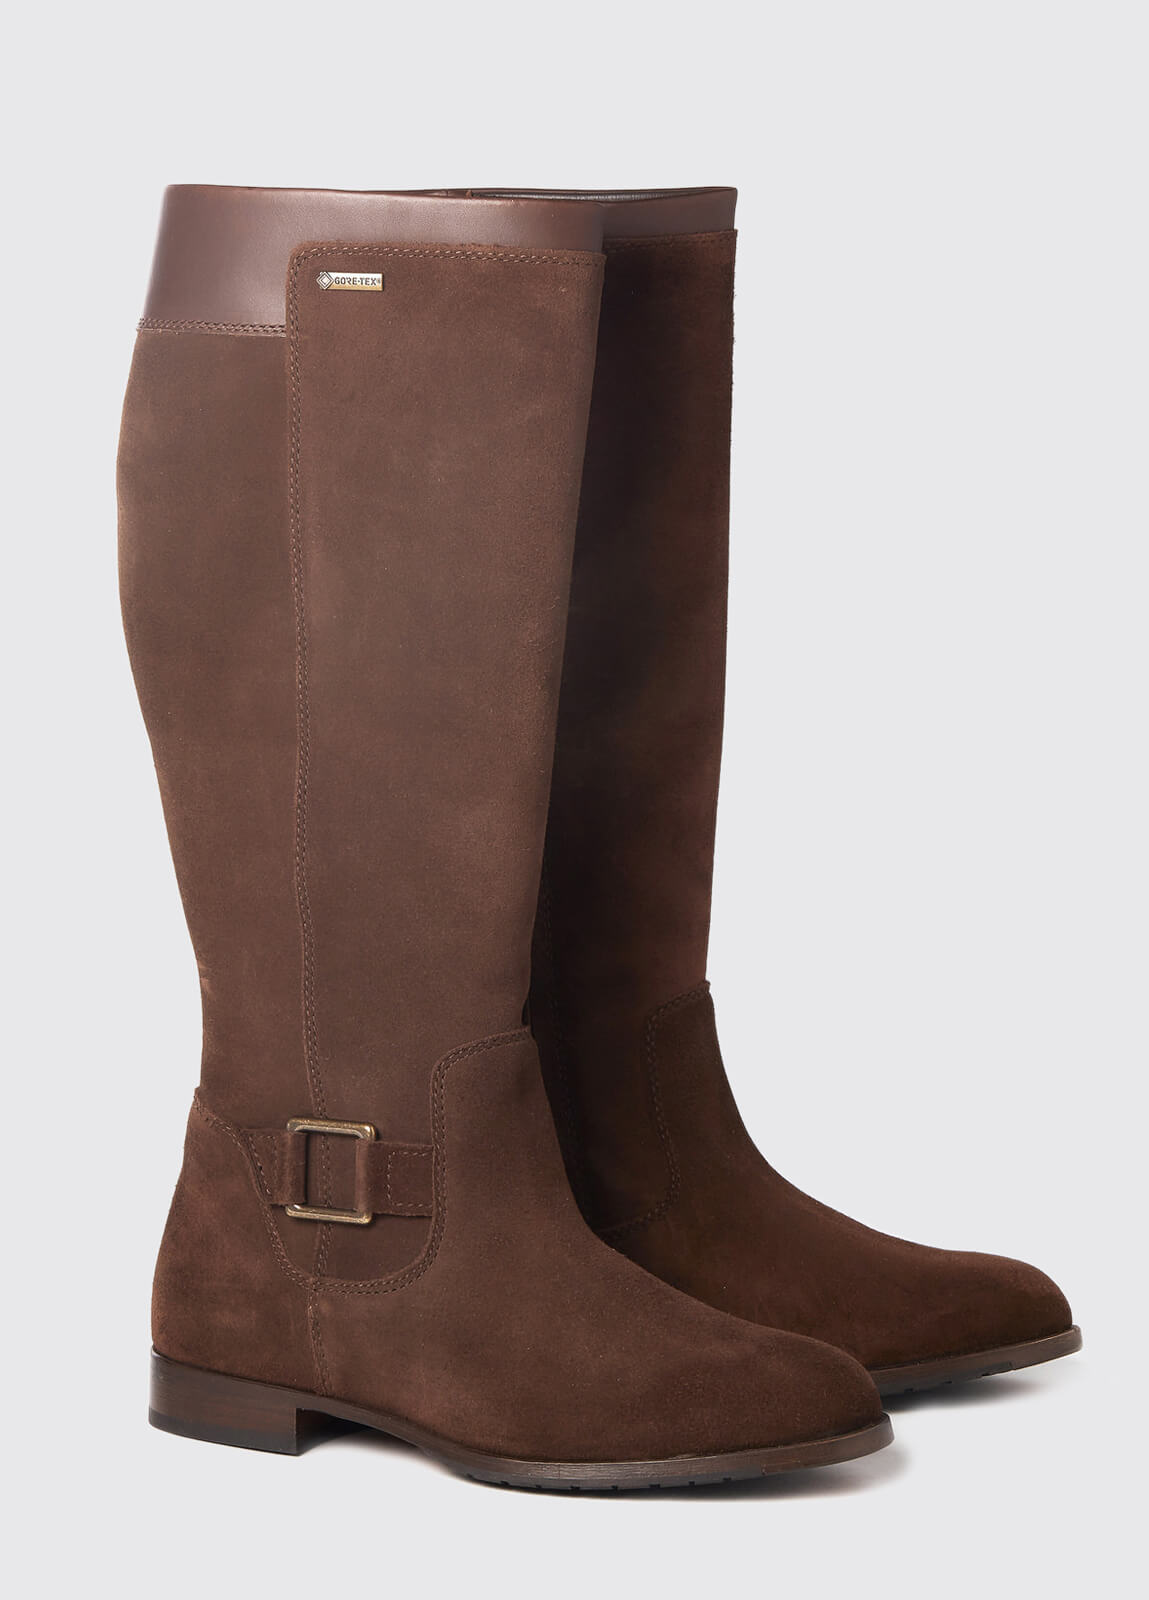 Limerick Soled Boot | Dubarry